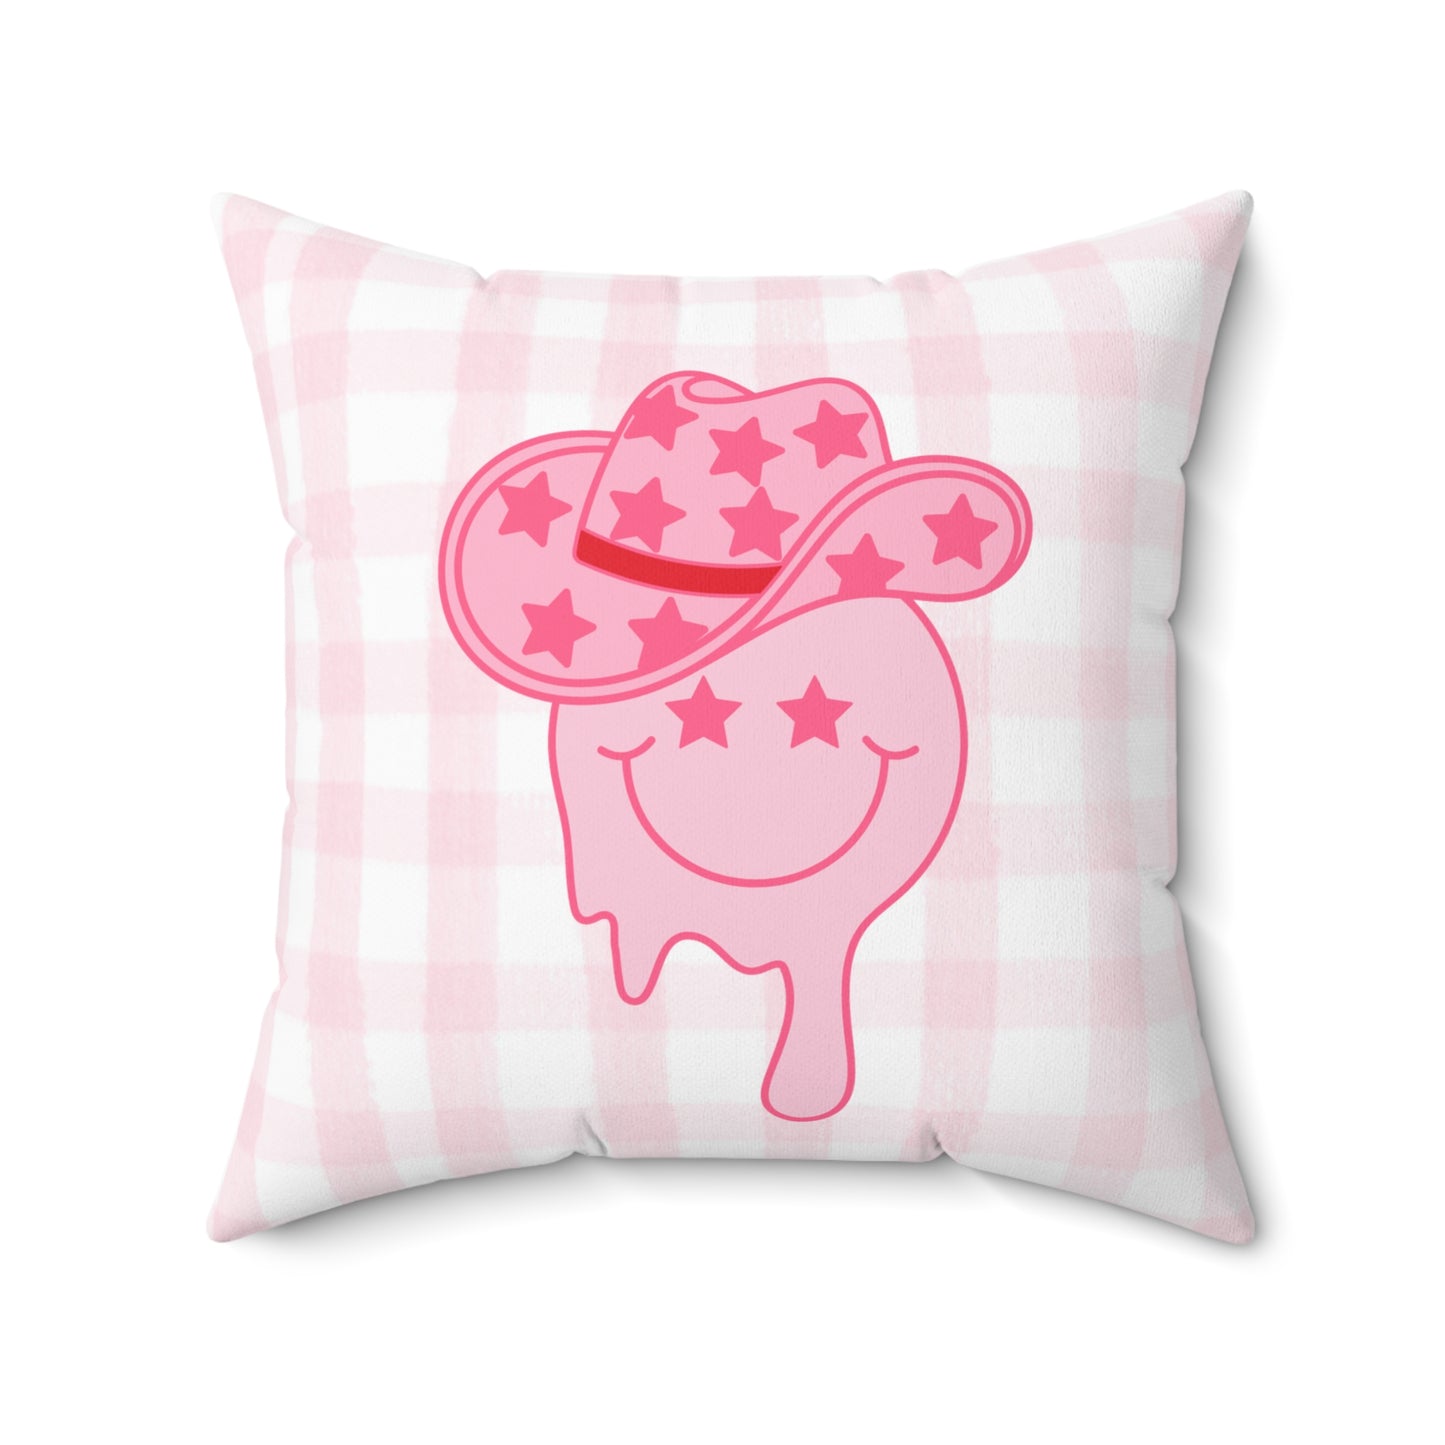 Bright Pink Smiley Star Face Cowgirl Pink and White Plaid Double Sided Square Pillow - Multiple Sizes